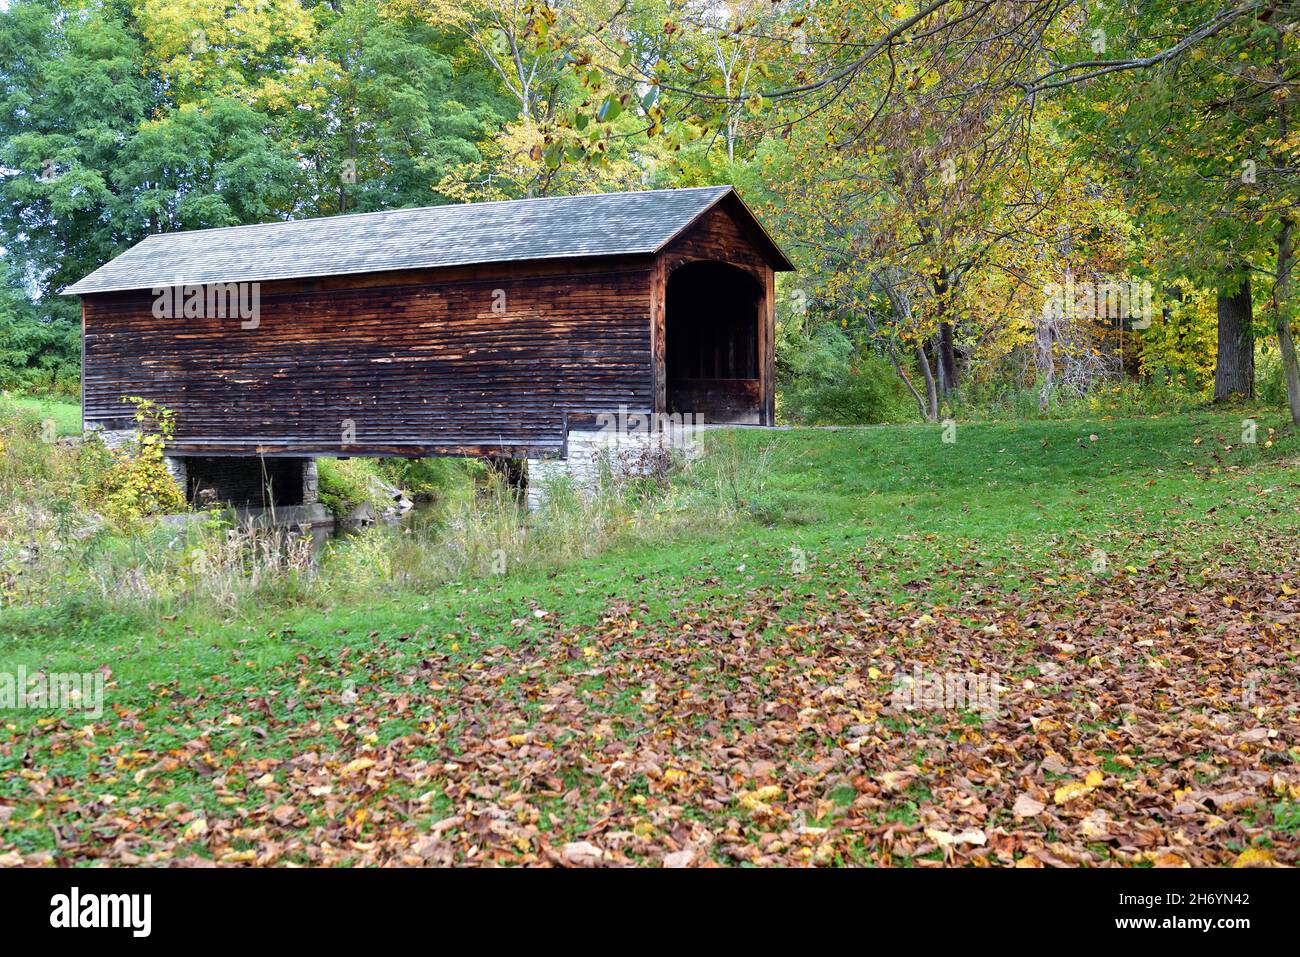 Cooperstown, New York, USA. An early autumn view of the Hyde Hall Covered Bridge over Shadow Brook. The bridge was built in 1825. Stock Photo